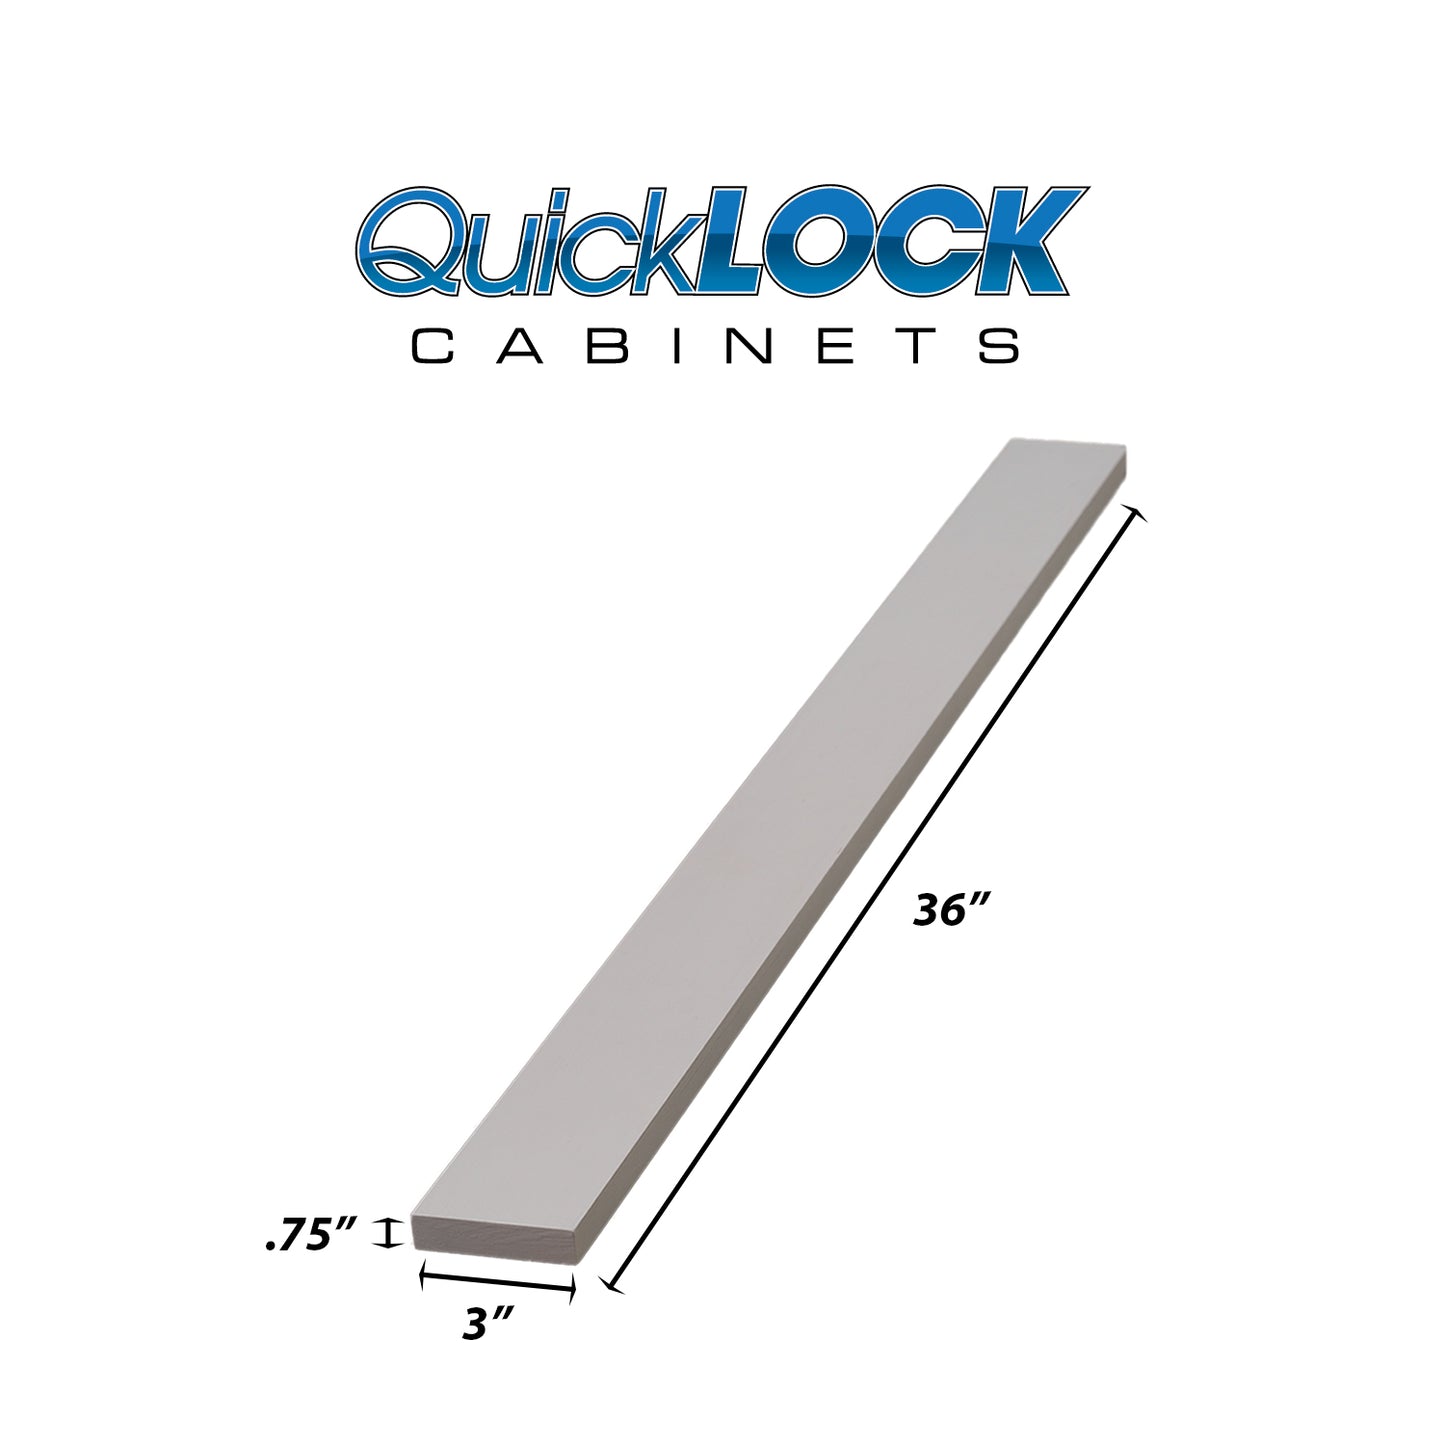 Quicklock RTA (Ready-to-Assemble) Magnetic Grey .75"X3"X36" Filler